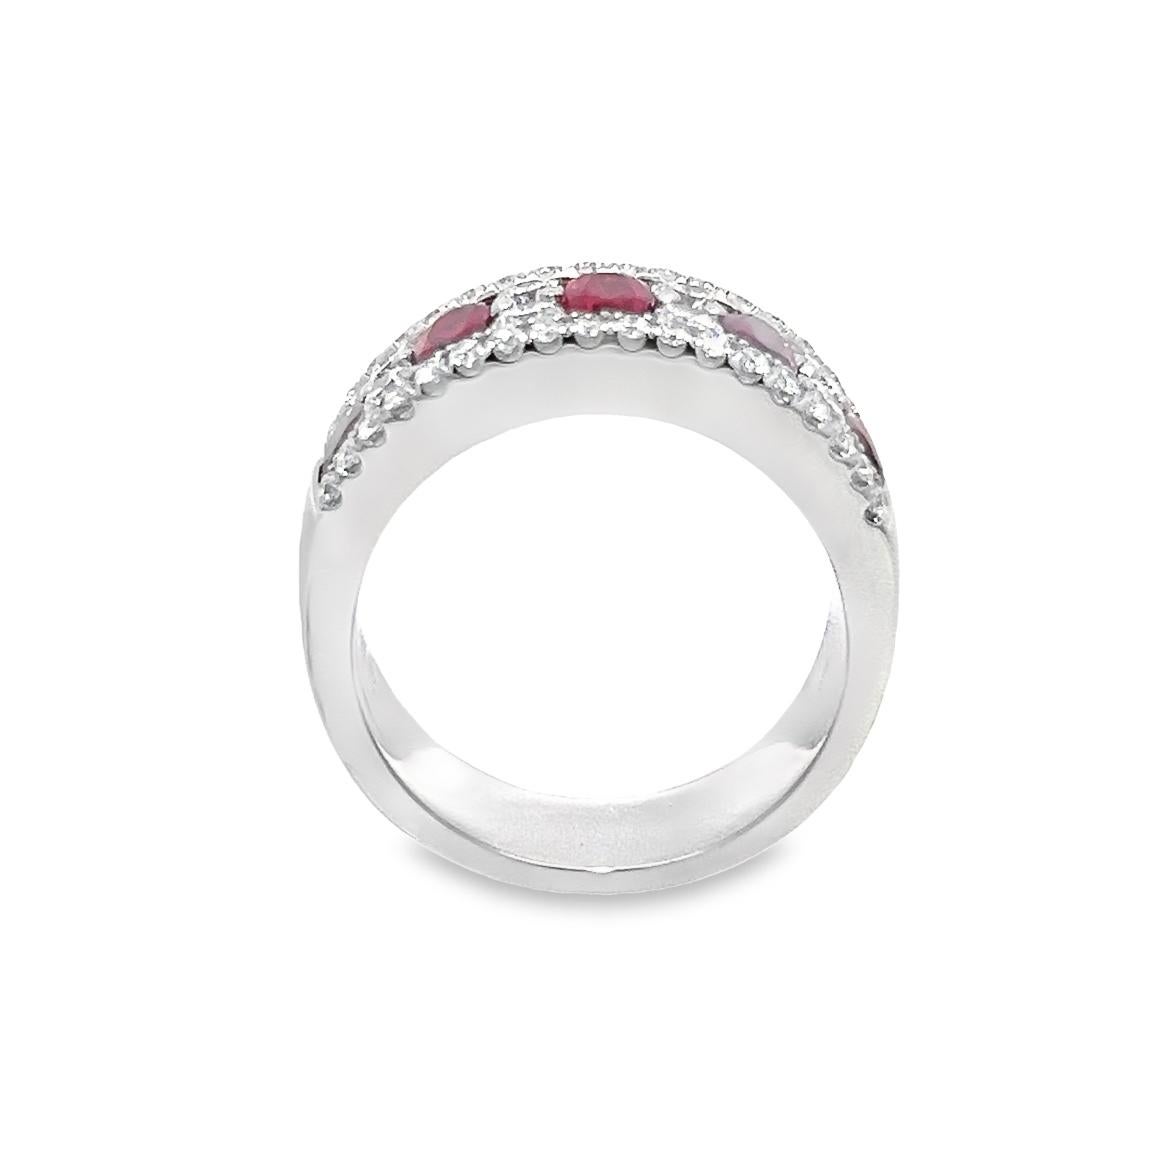 Late Victorian Late- Victorian Style Ruby and Diamond Ladies Ring Set in 18K White Gold For Sale